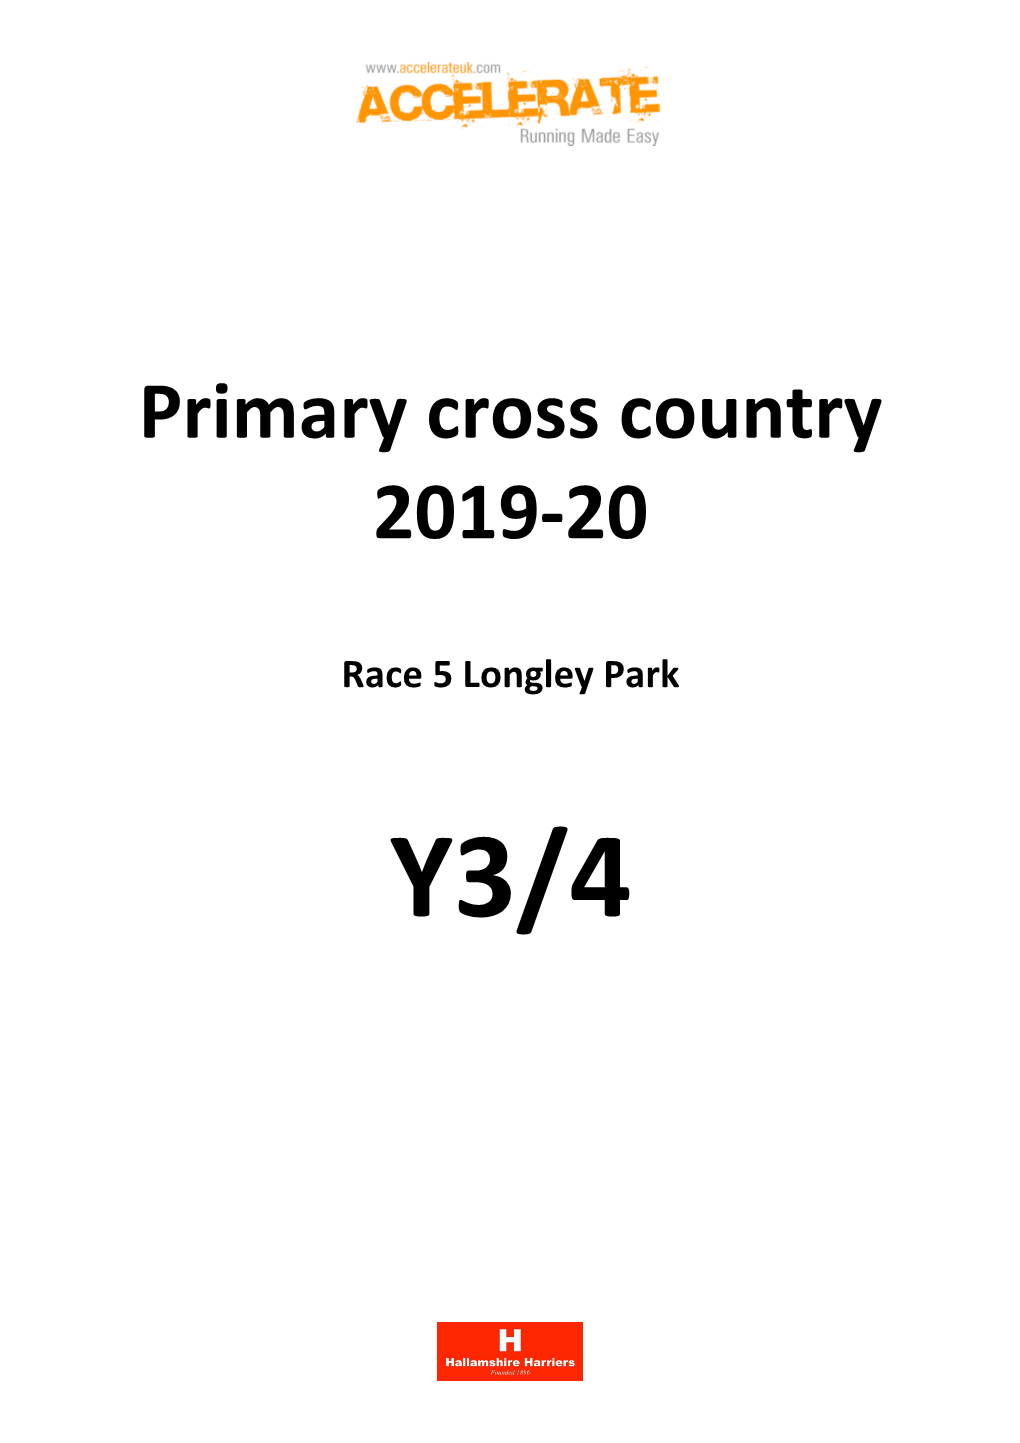 Primary Cross Country 2019-20